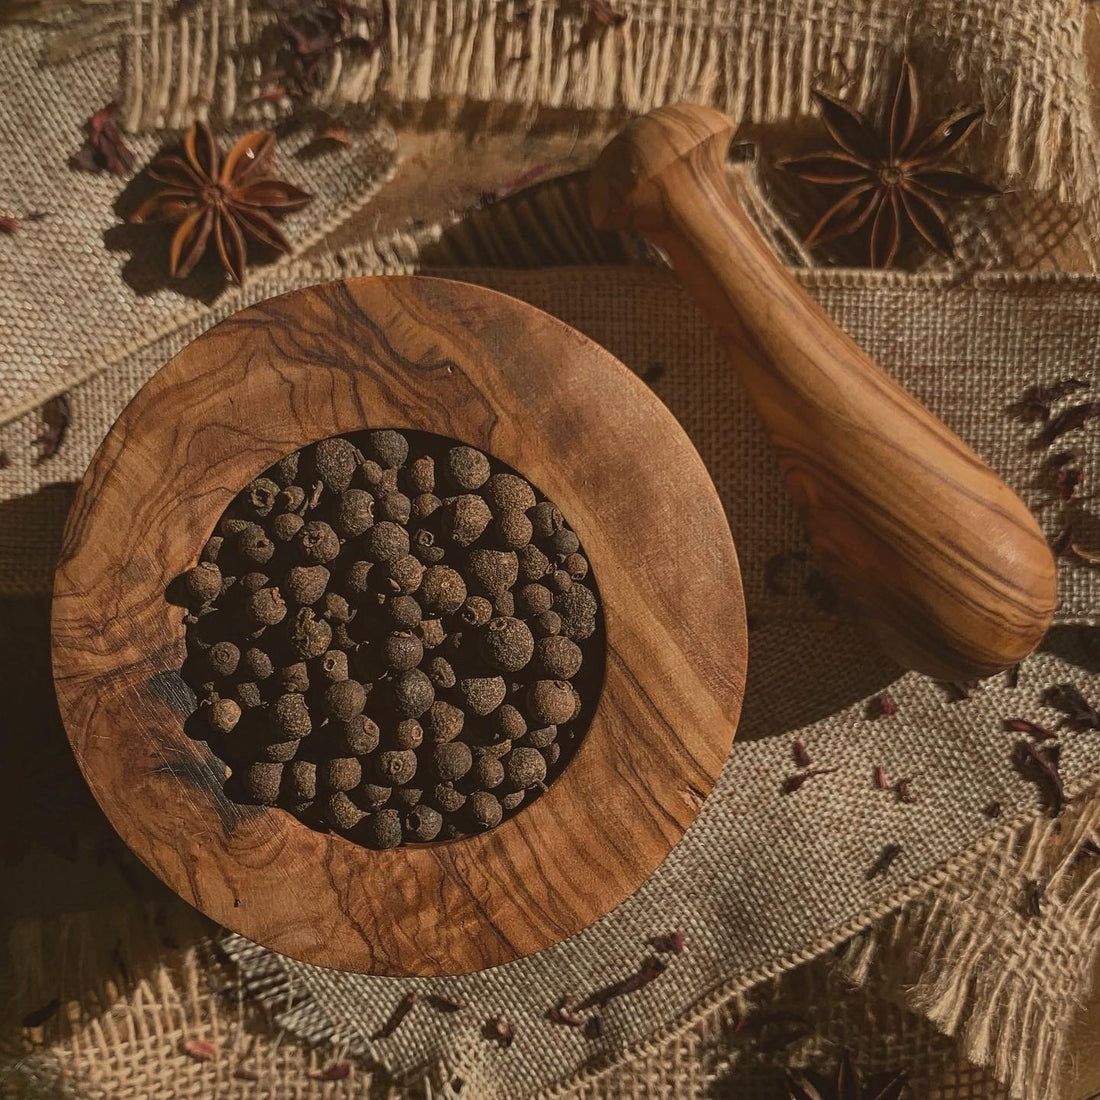 Allspice: The magical properties and metaphysical uses of Jamaican pepper